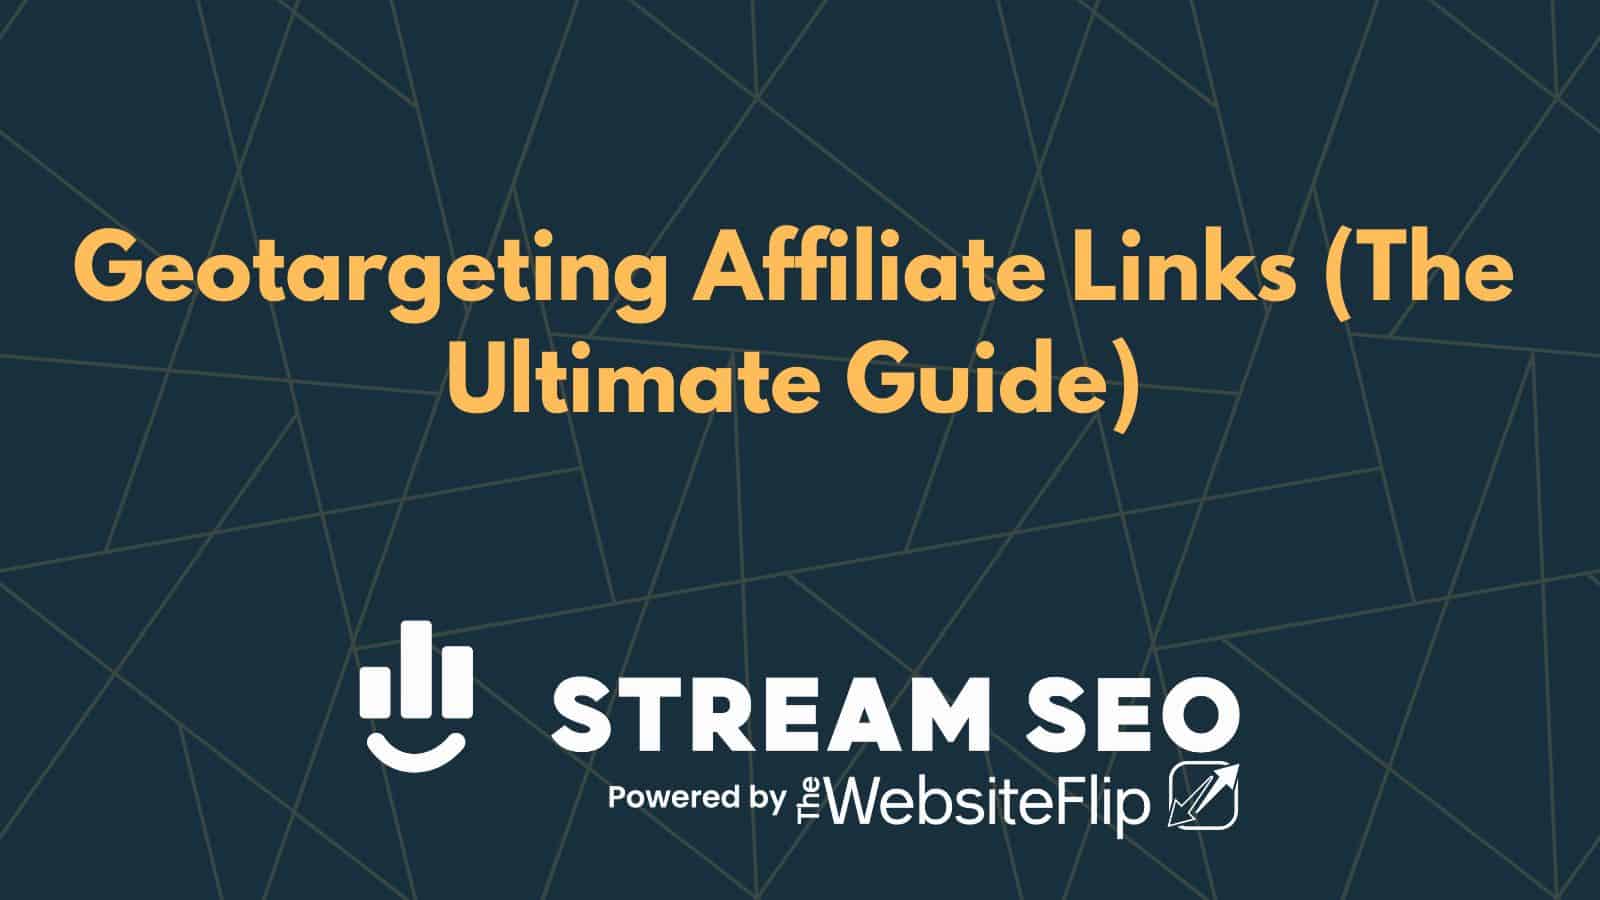 Geotargeting Affiliate Links (The Ultimate Guide)